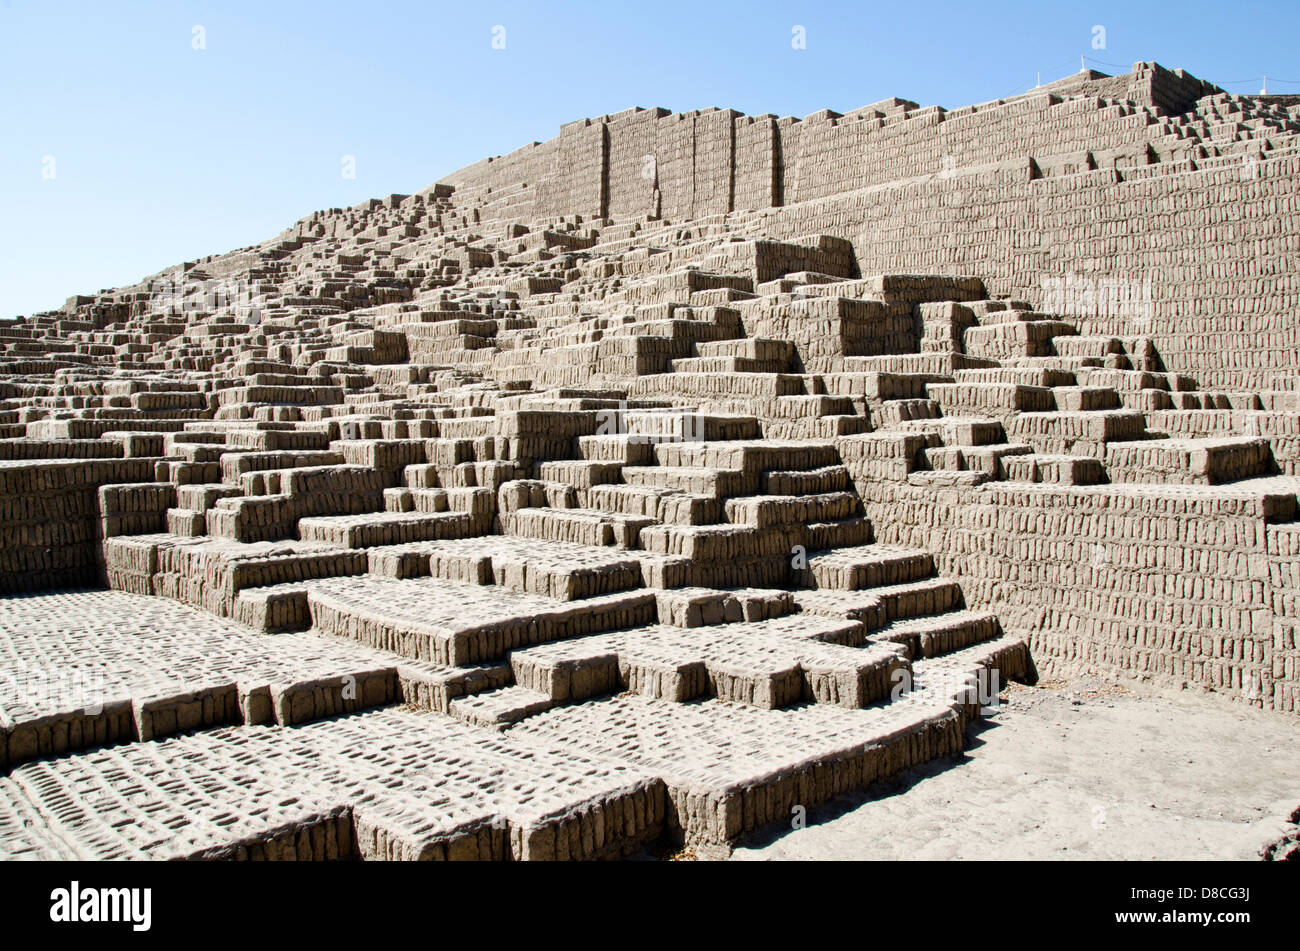 Huaca Pucllana. Lima culture 200 AD and 700 AD. Miraflores district. Lima city. Peru.Archaeological site. Stock Photo